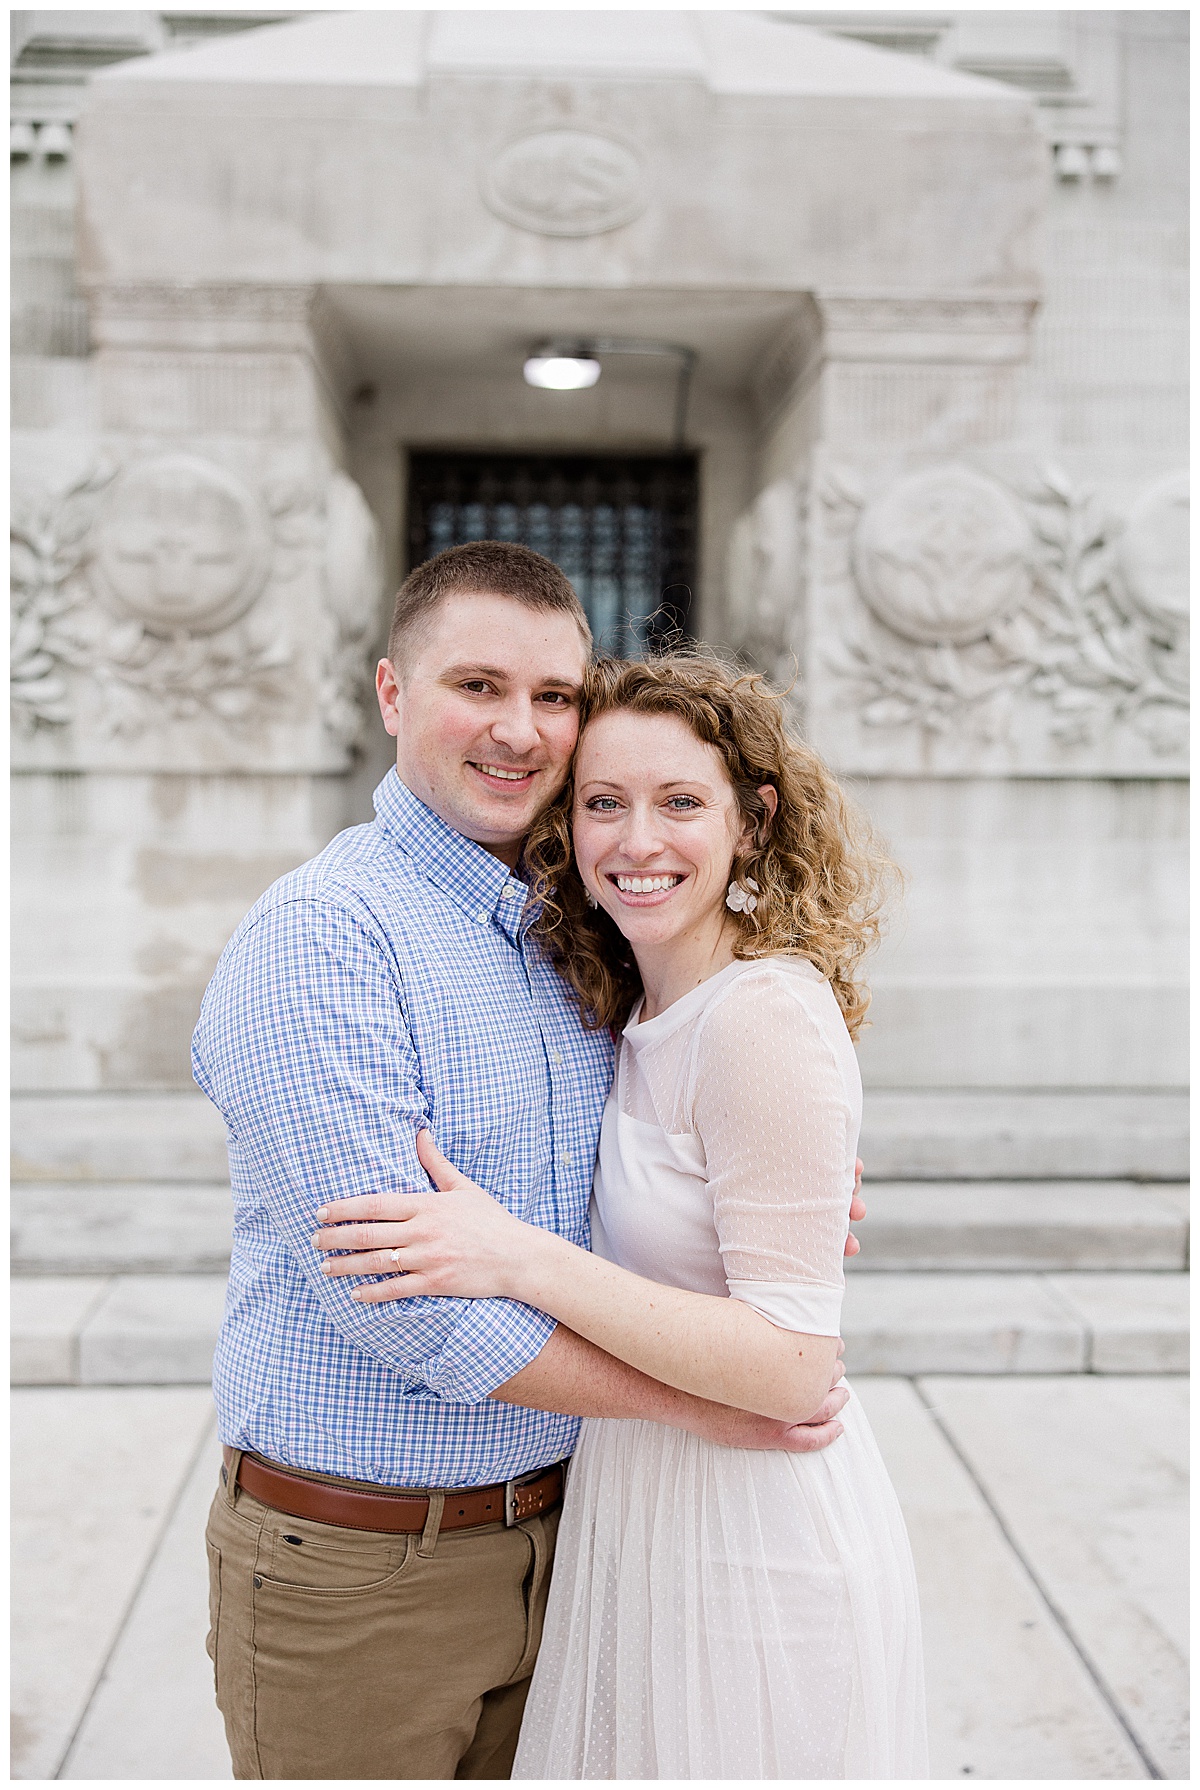 Kaitlin Mendoza Photography captured Monument Circle engagement photos for Sondra and Dylan